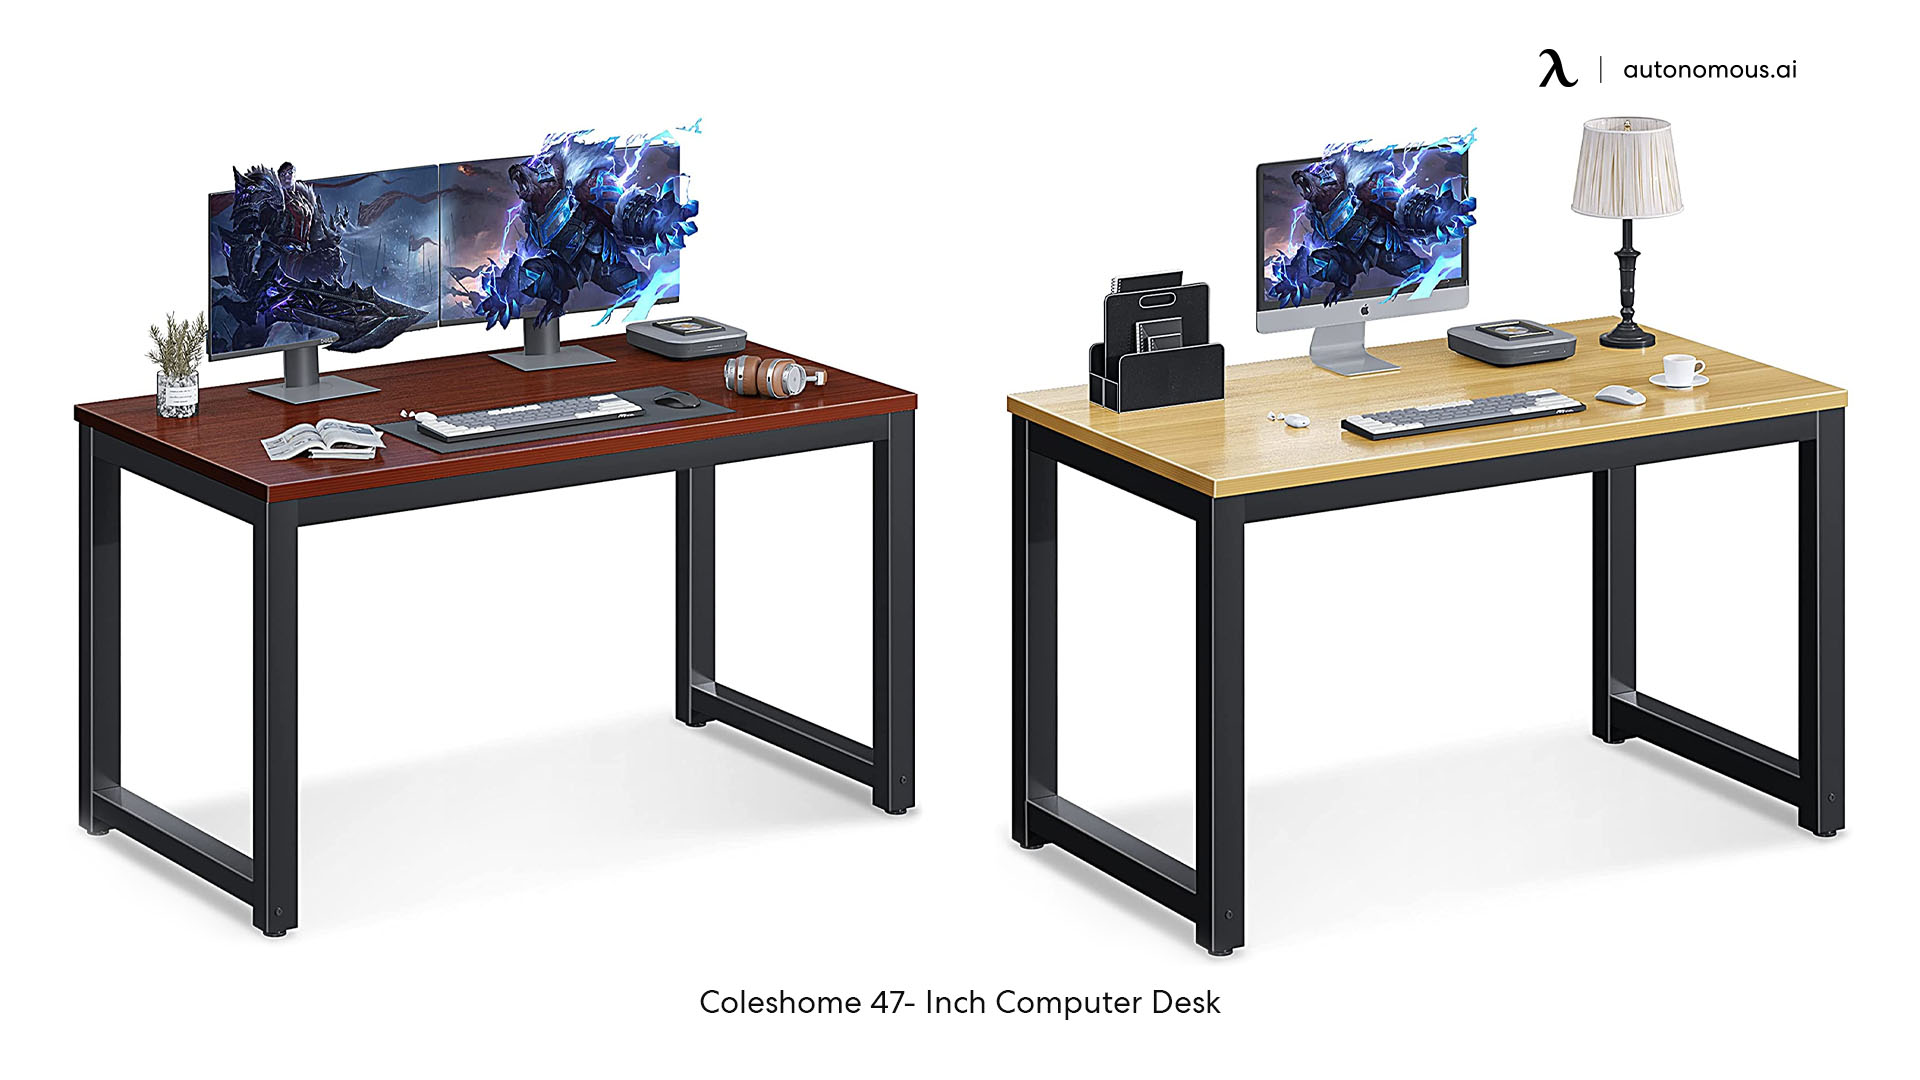 Coleshome 47- Inch desk for college students